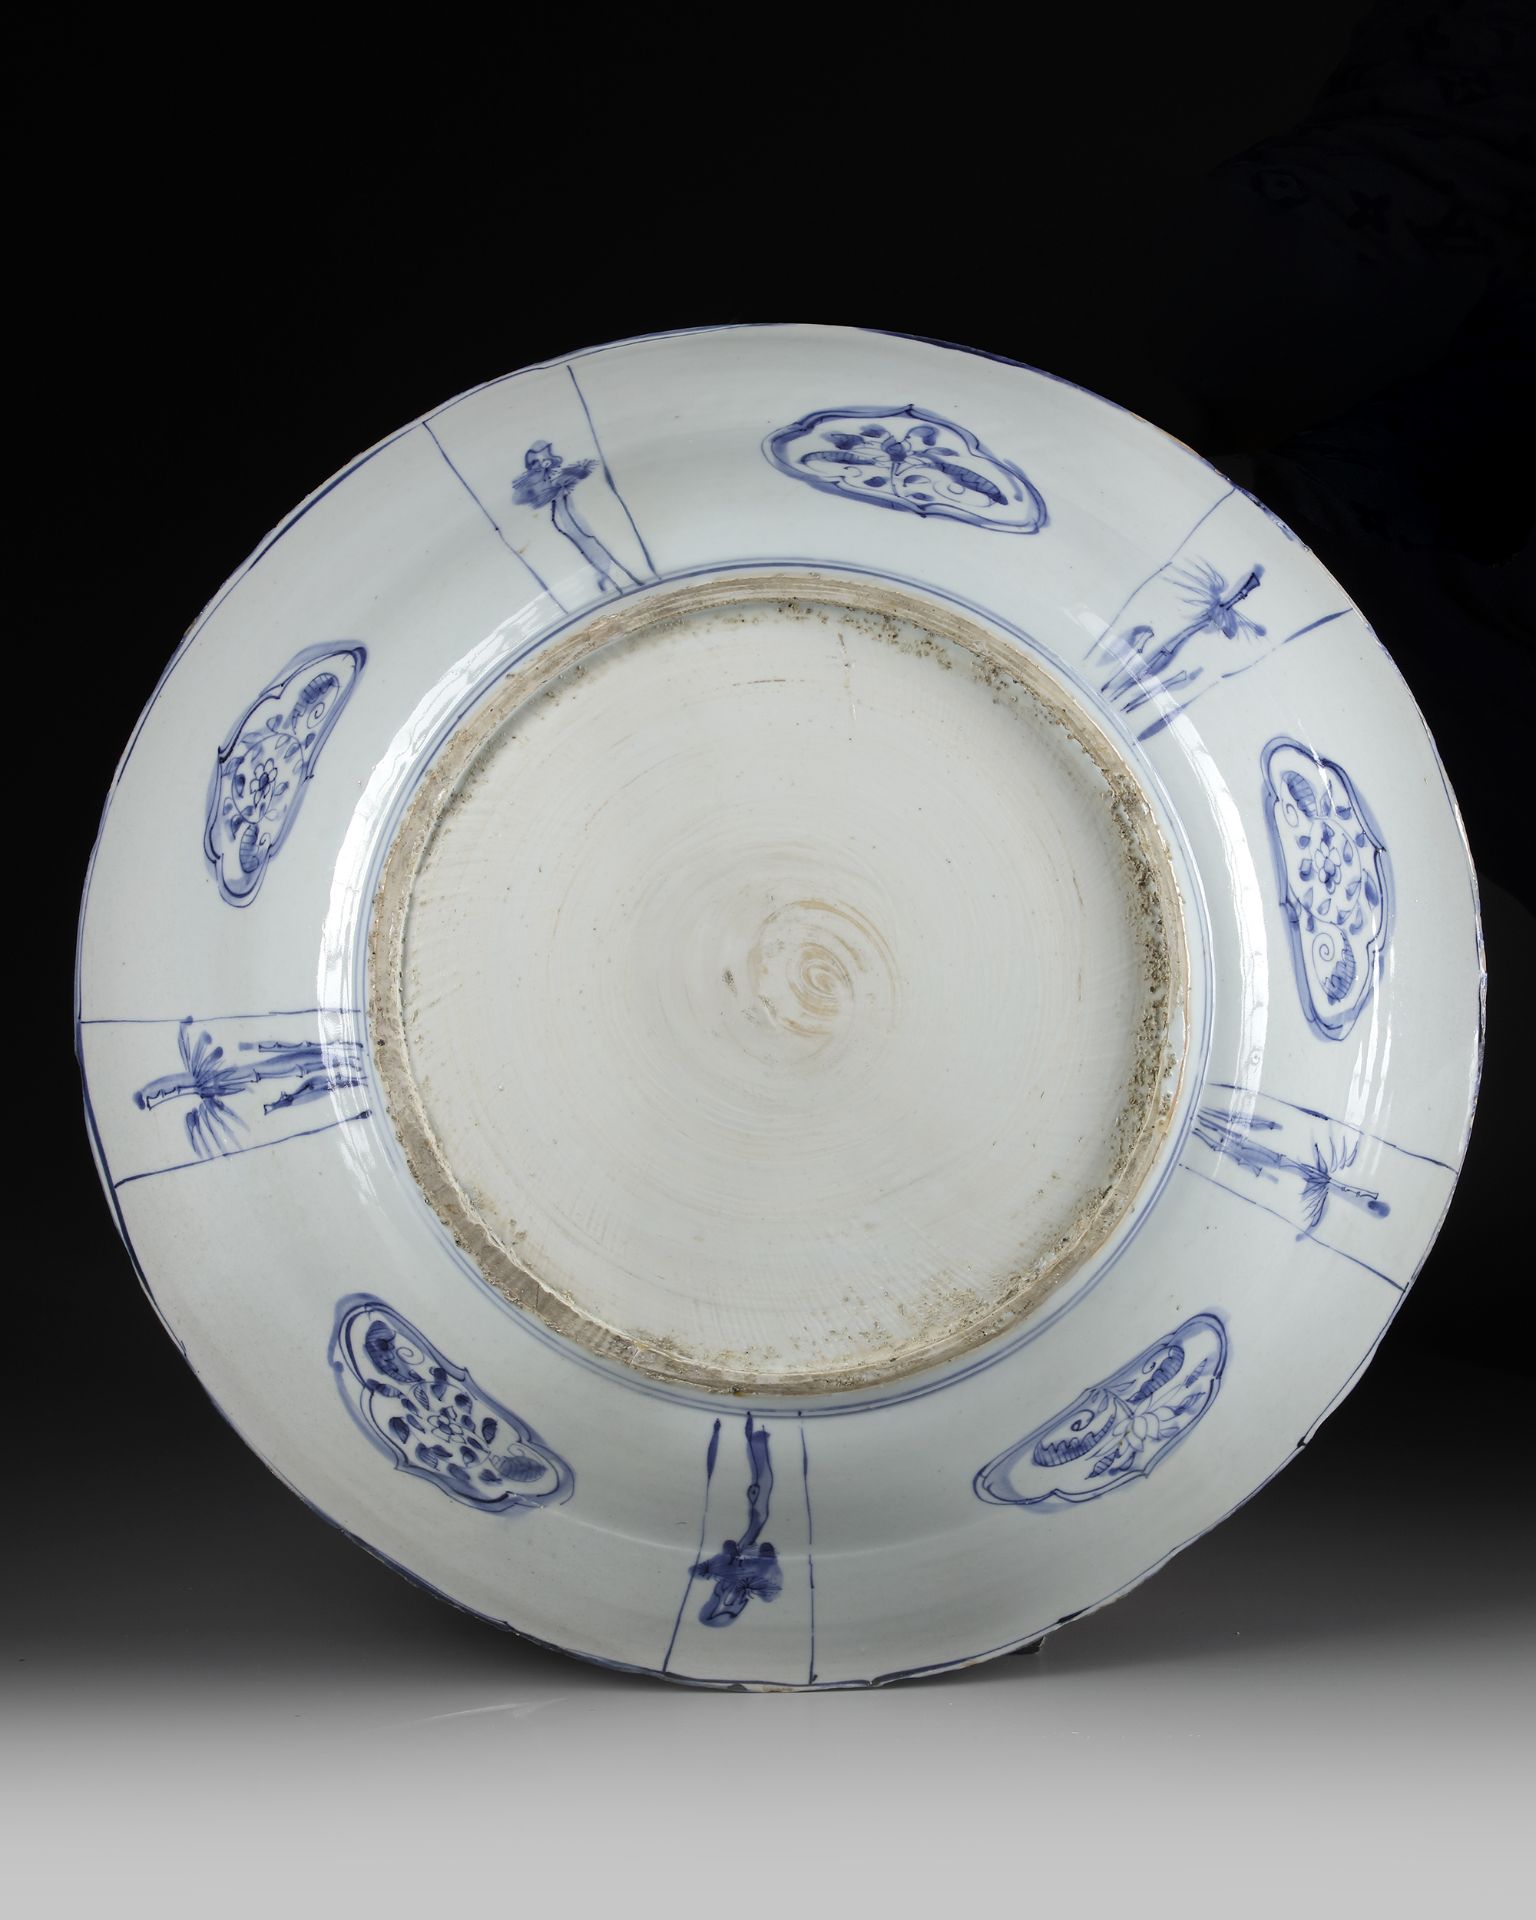 A LARGE CHINESE BLUE AND WHITE 'KRAAK PORSELEIN' CHARGER, 17TH CENTURY - Image 2 of 2